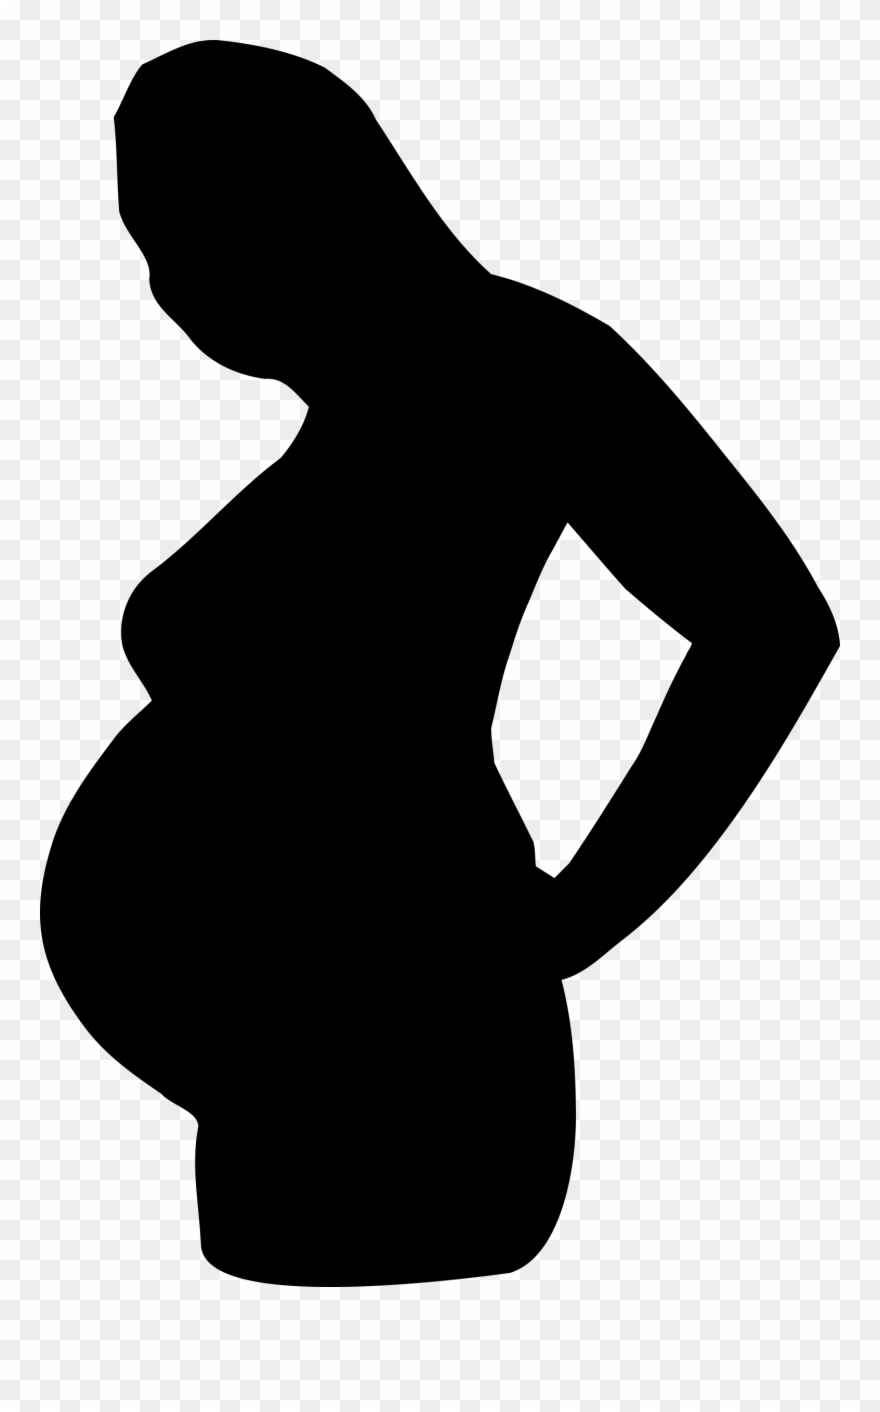 Mother Silhouette Clip Art Free Clipart Images.